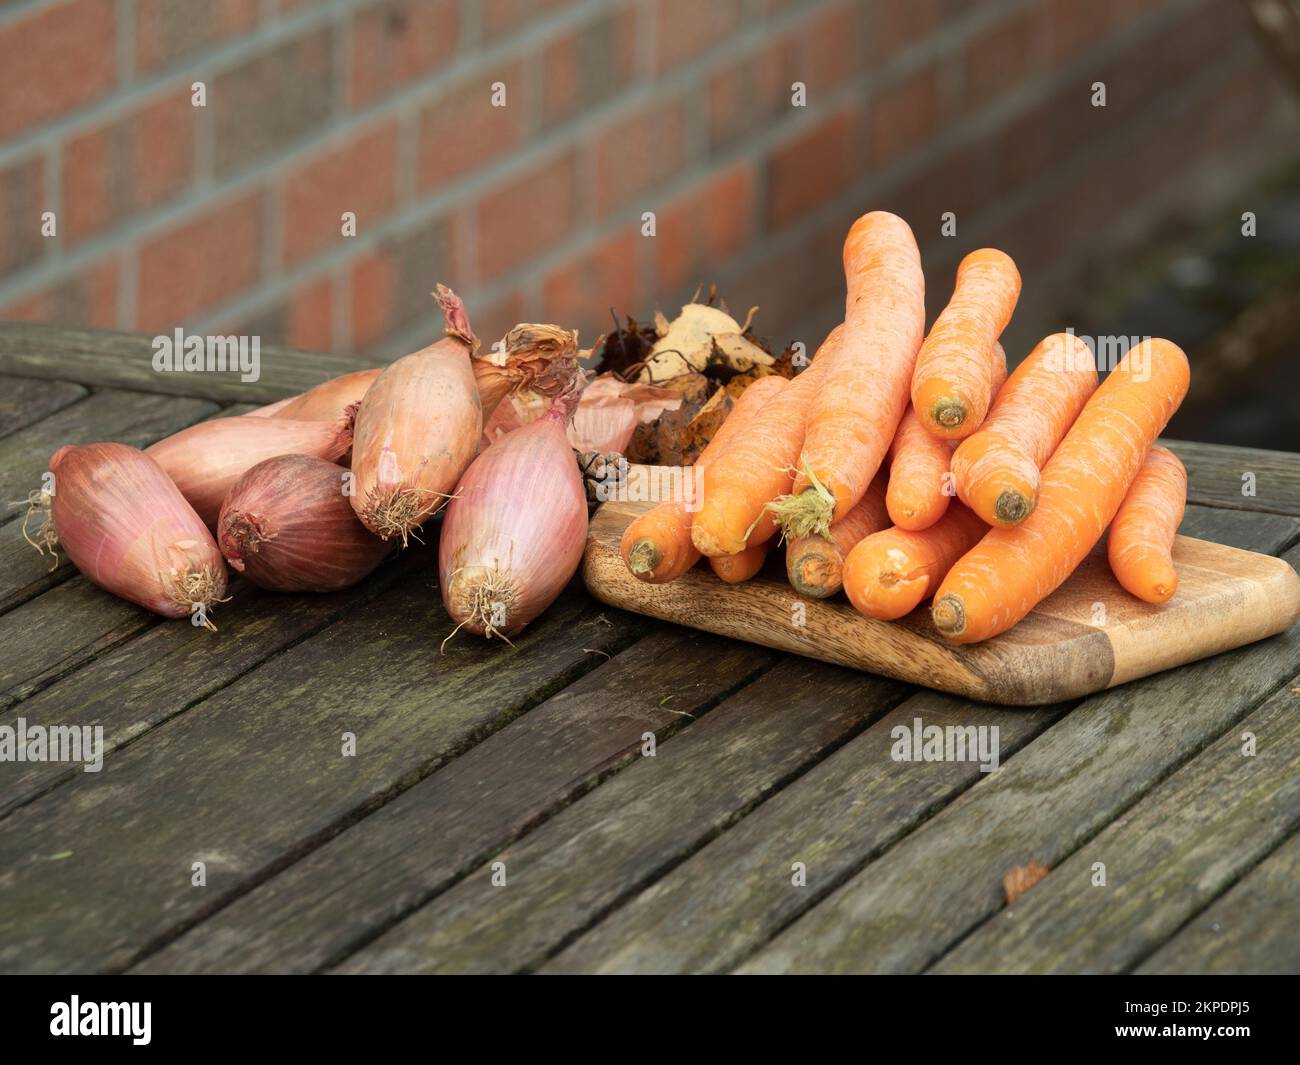 carrots and shallots outside on a wooden table Stock Photo